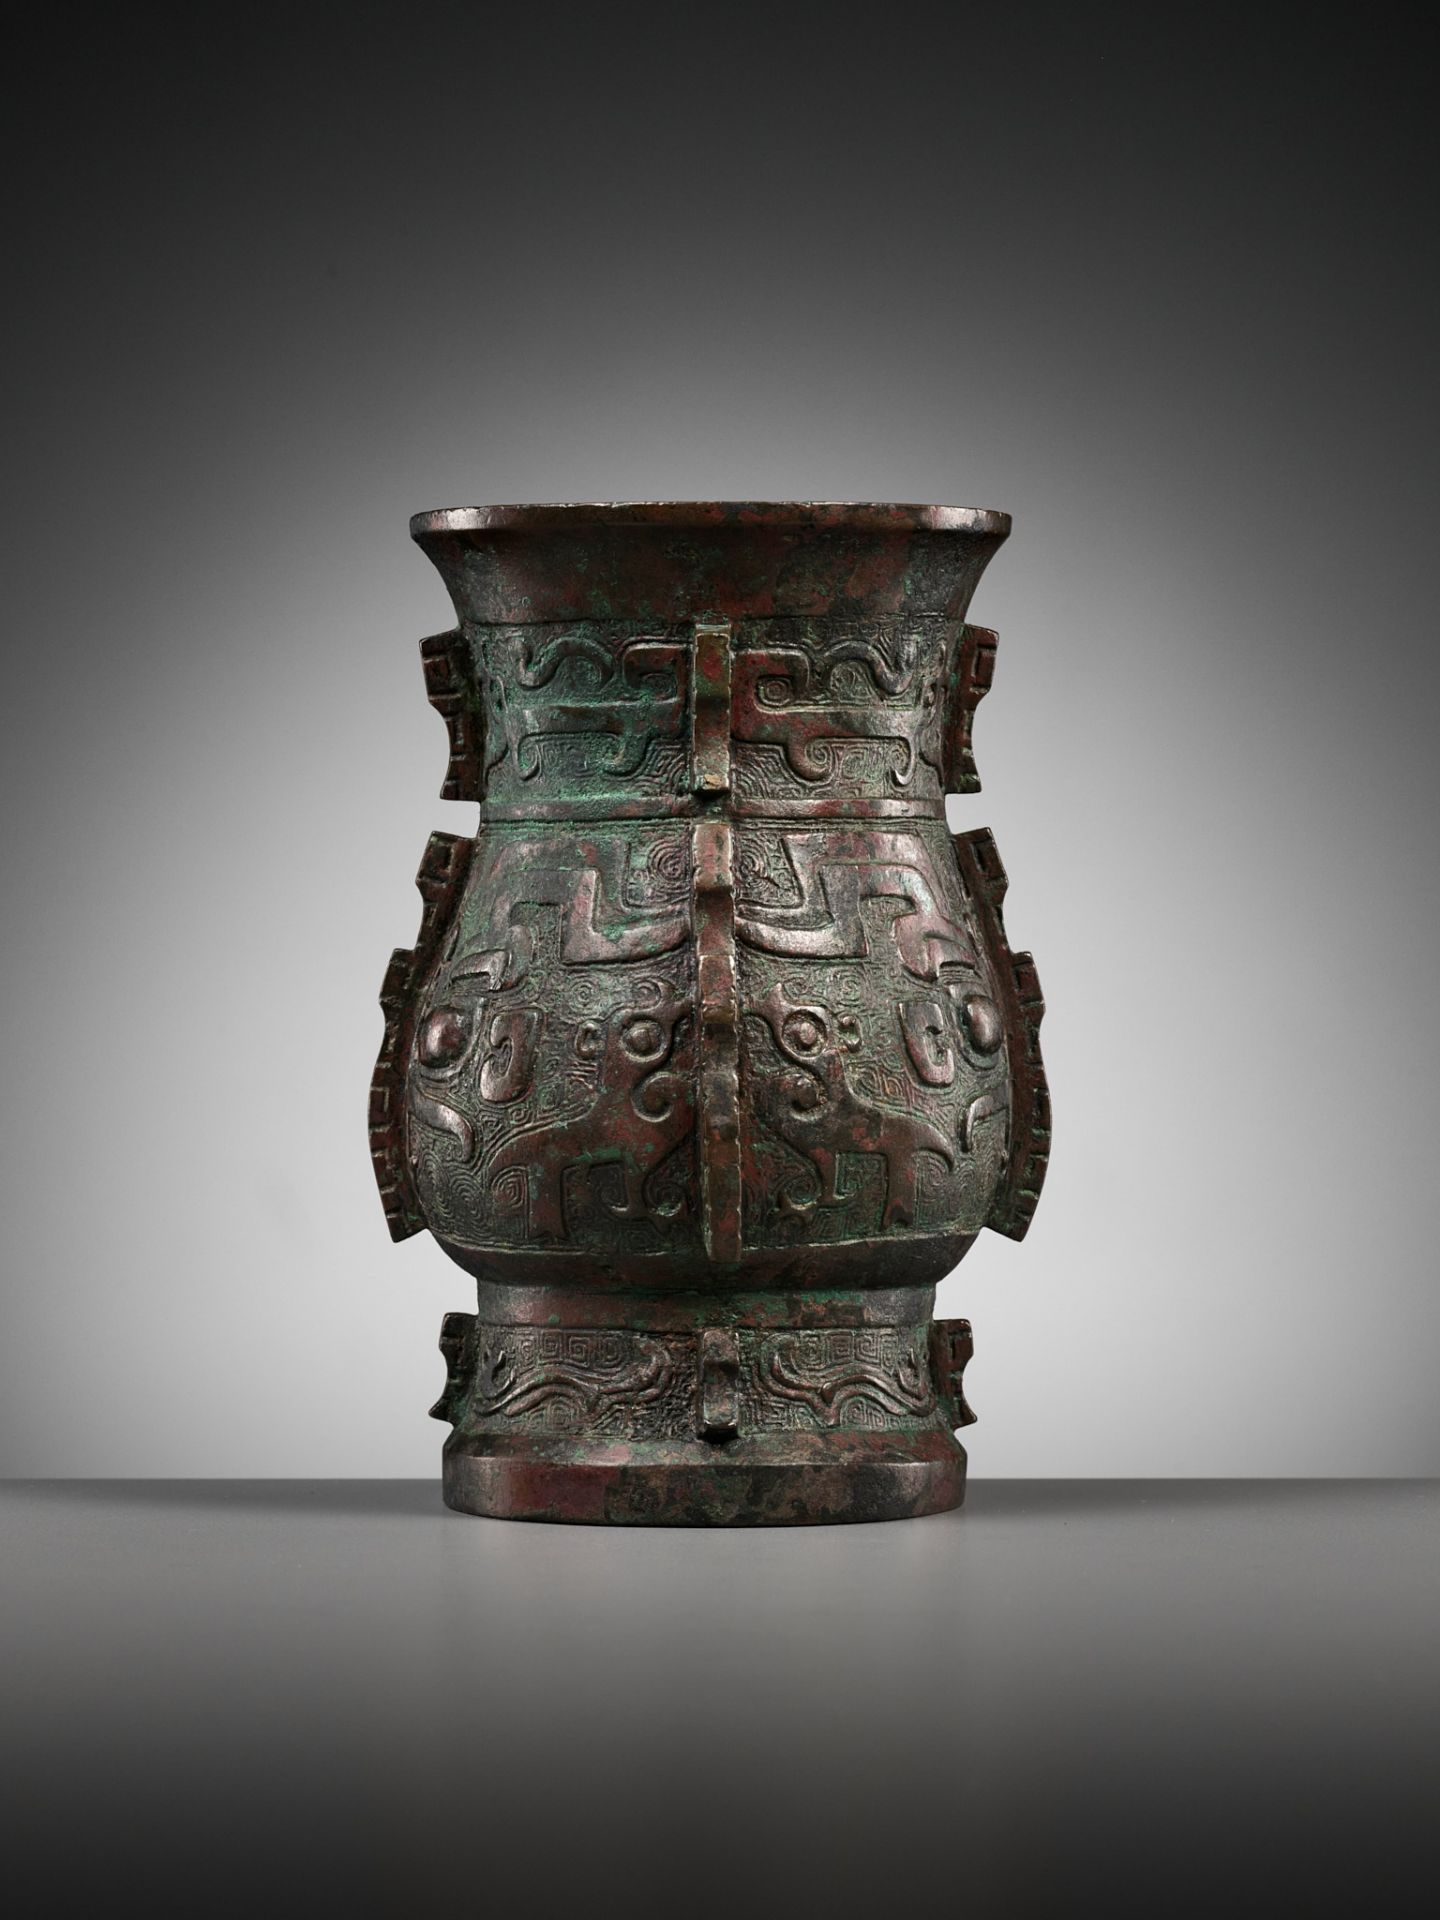 A RARE BRONZE RITUAL WINE VESSEL, ZHI, SHANG DYNASTY, CHINA, 13TH-12TH CENTURY BC - Image 15 of 25